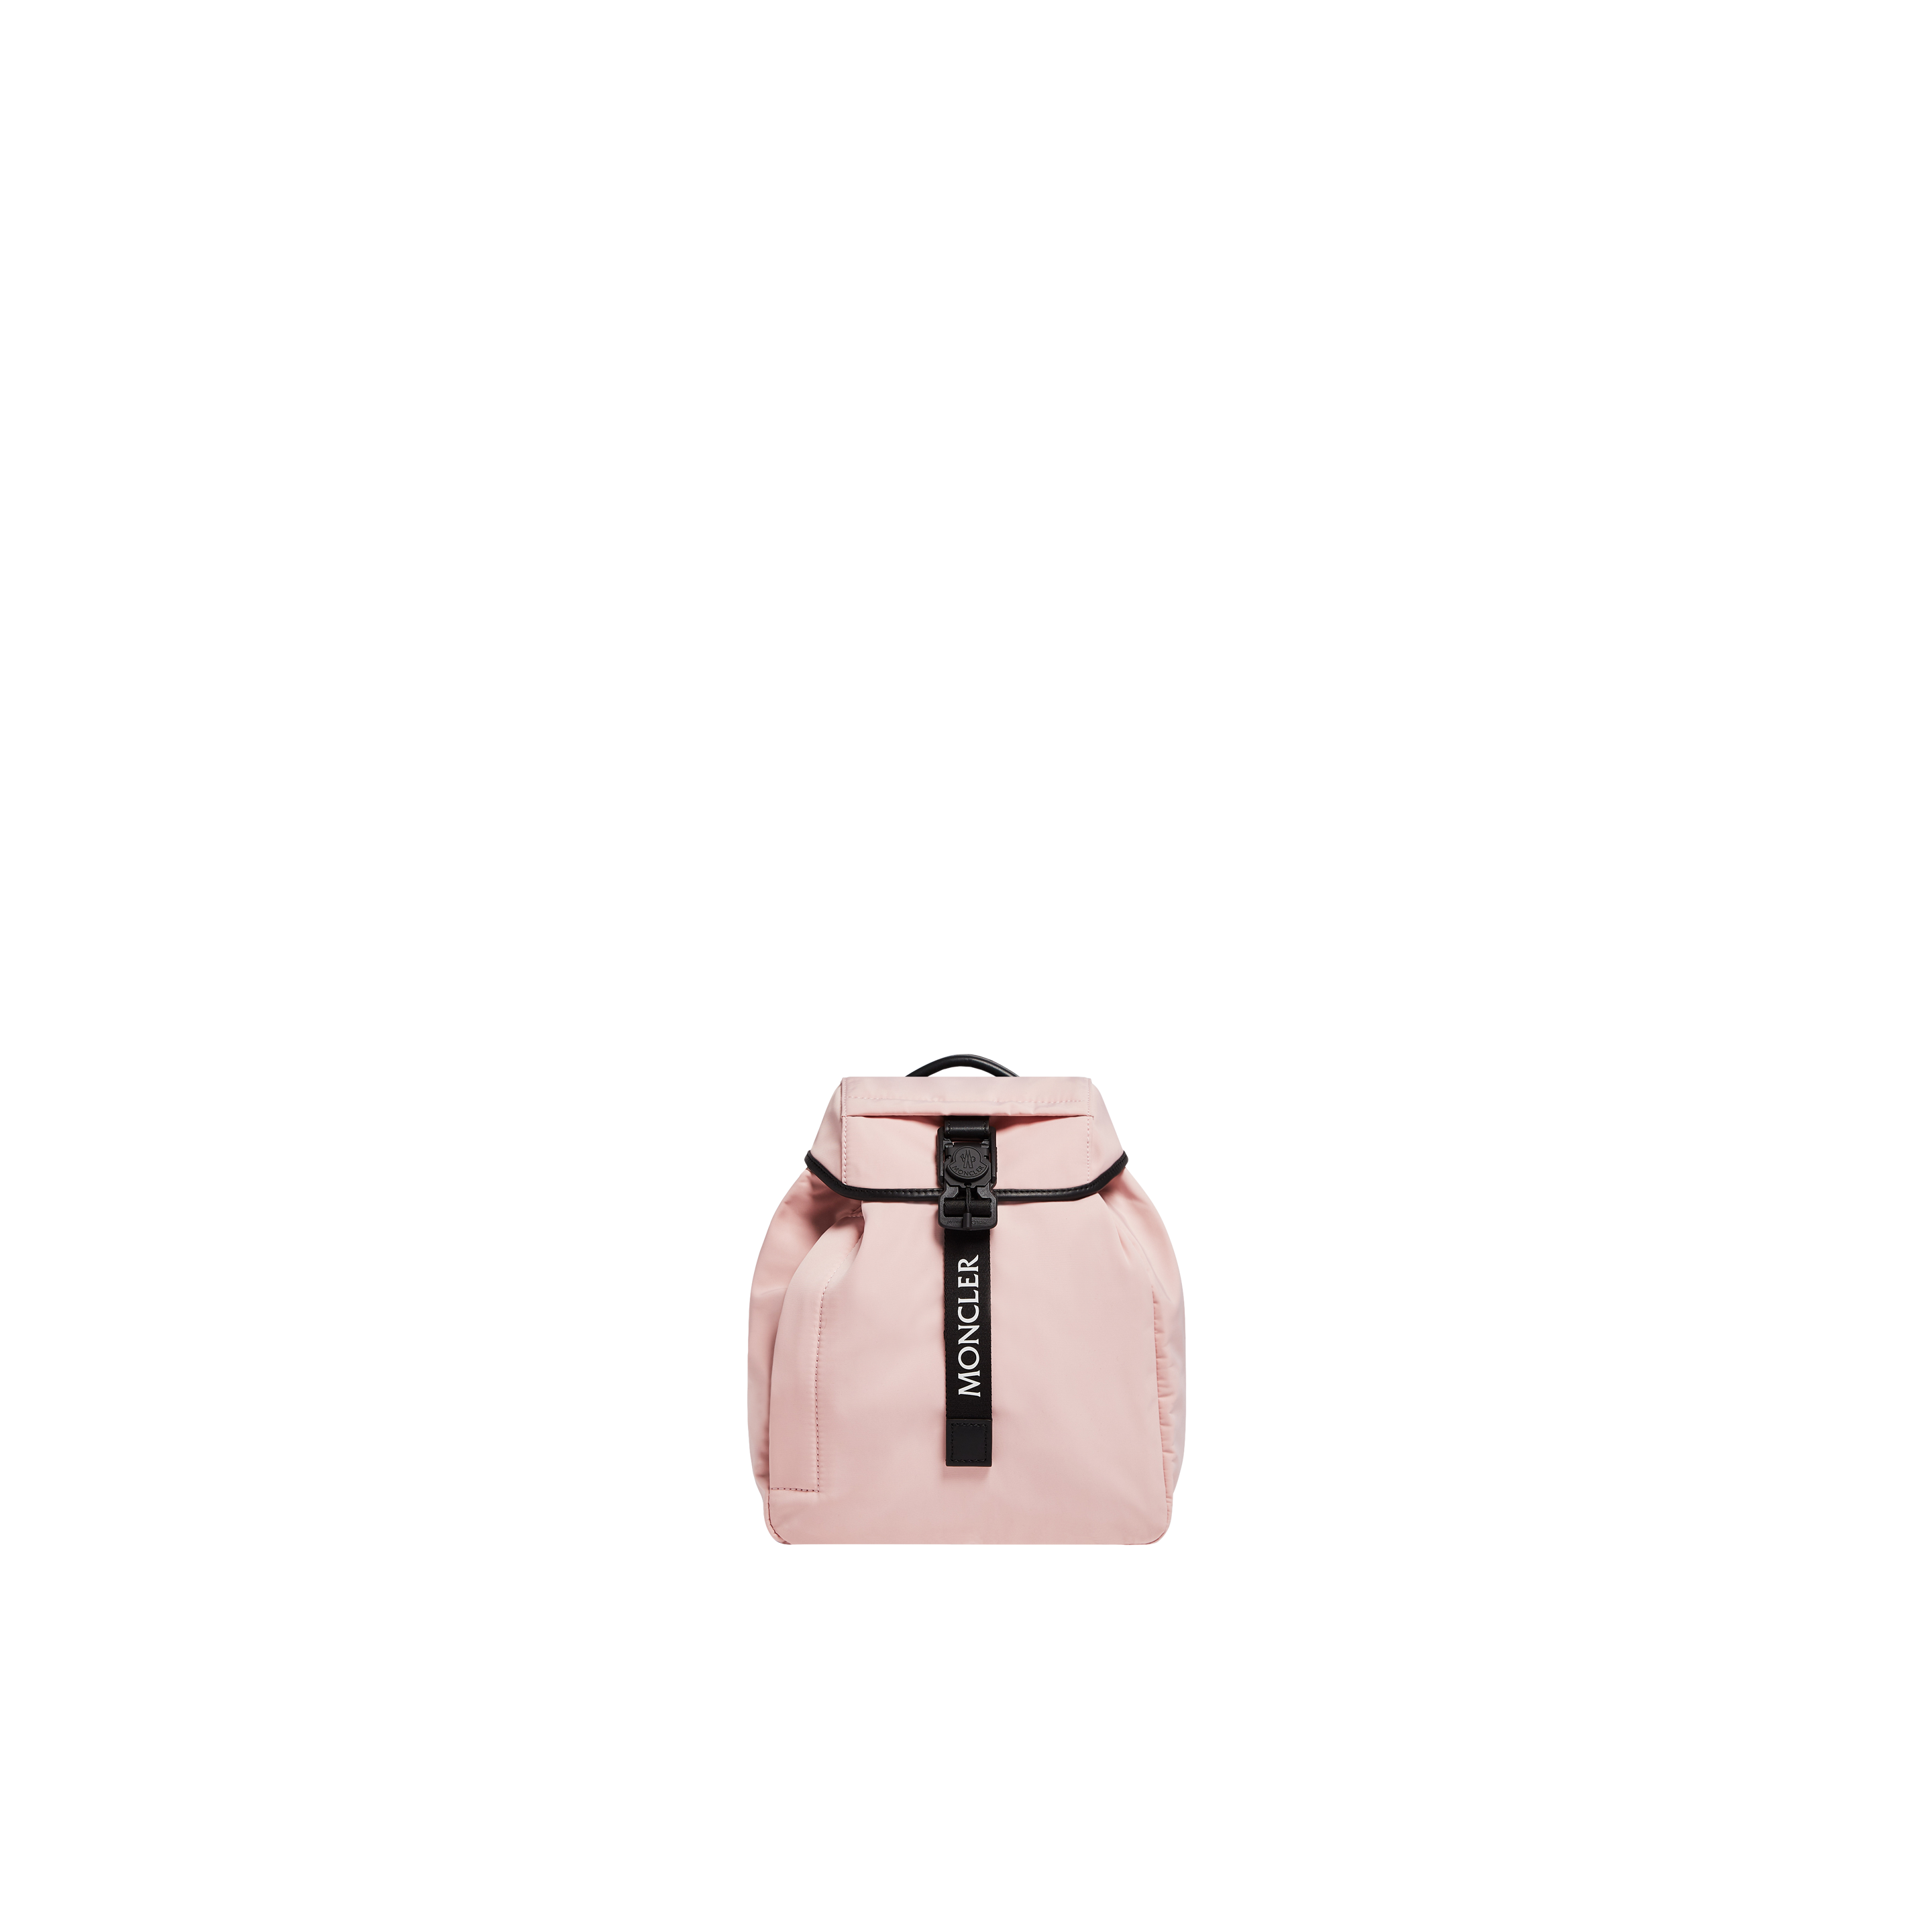 Moncler Collection Trick Backpack, Pink, Size: One Size